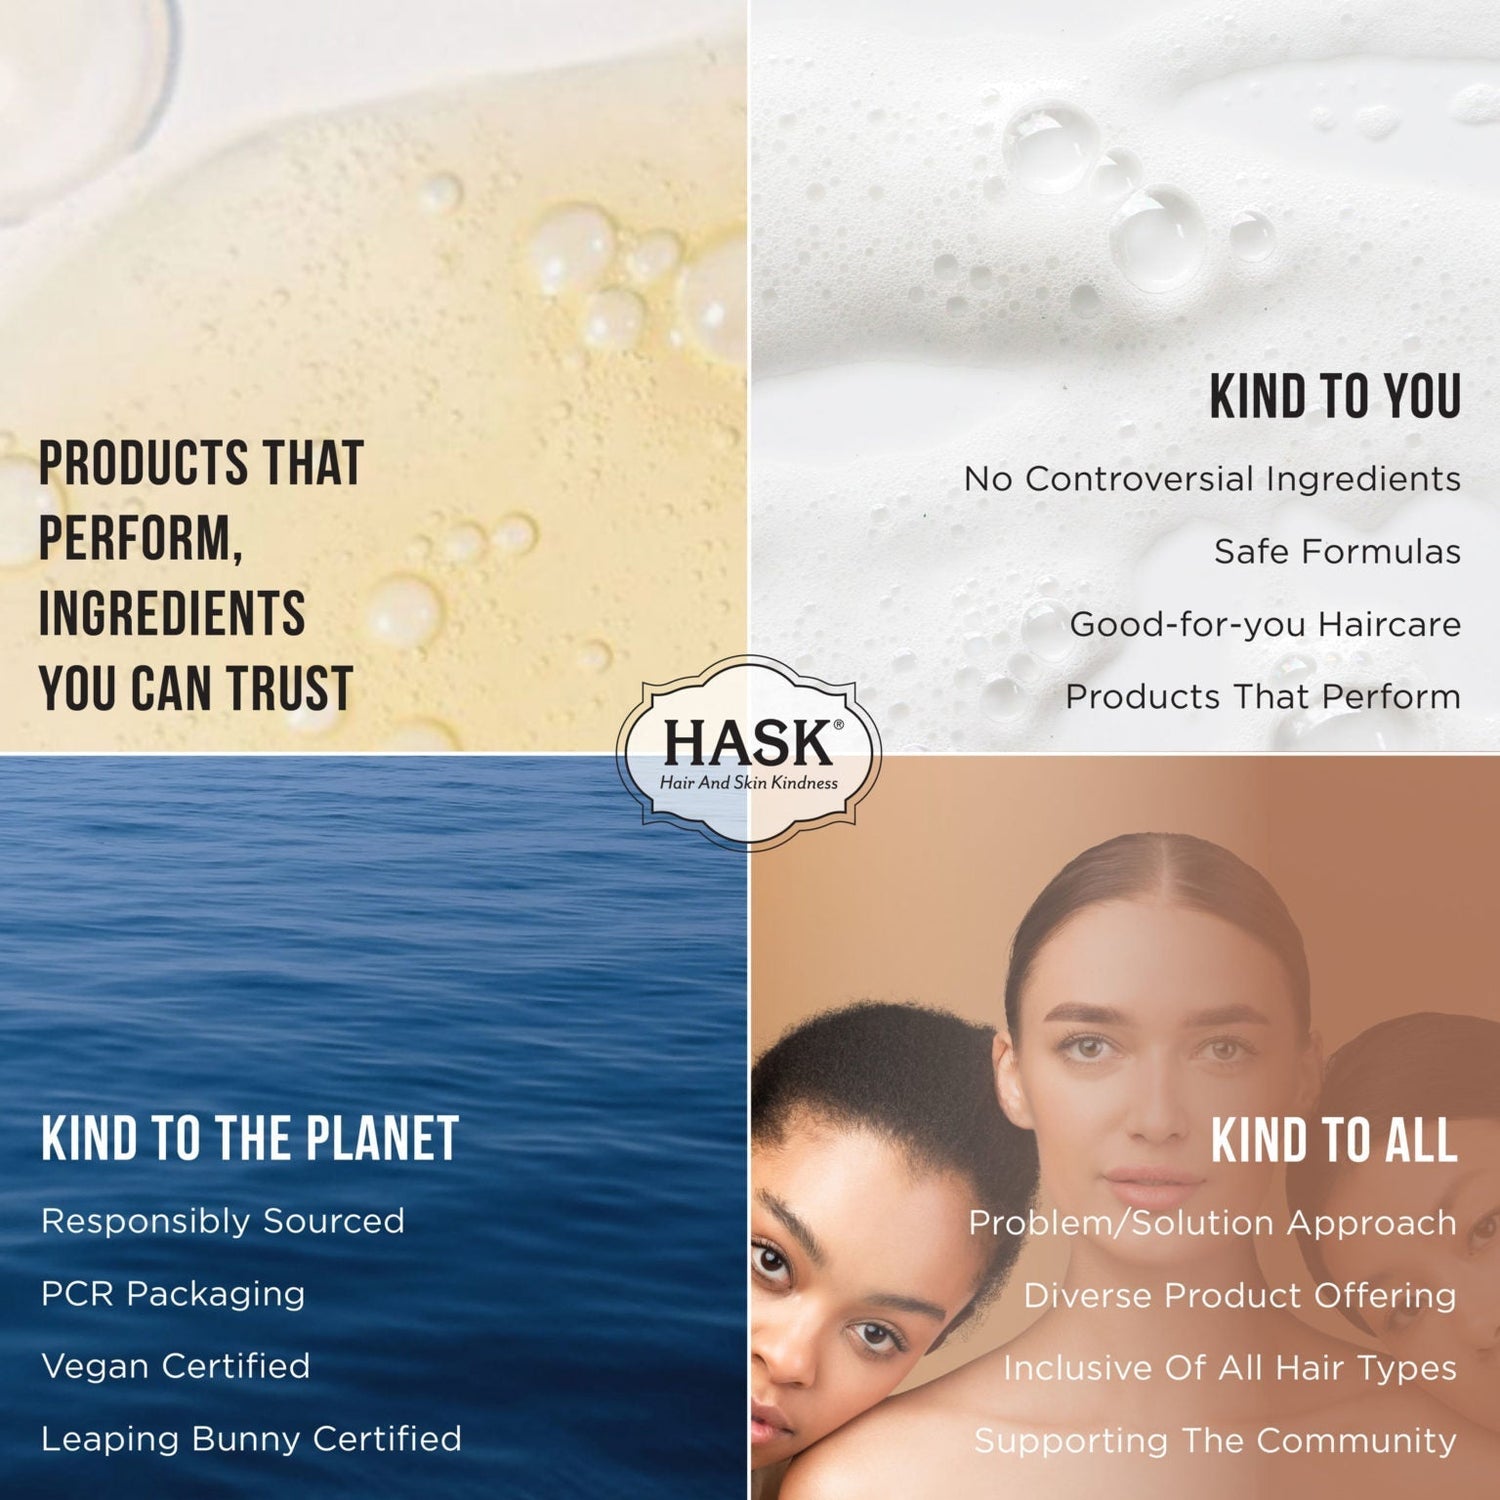 HASK Color Care Protection Conditioner